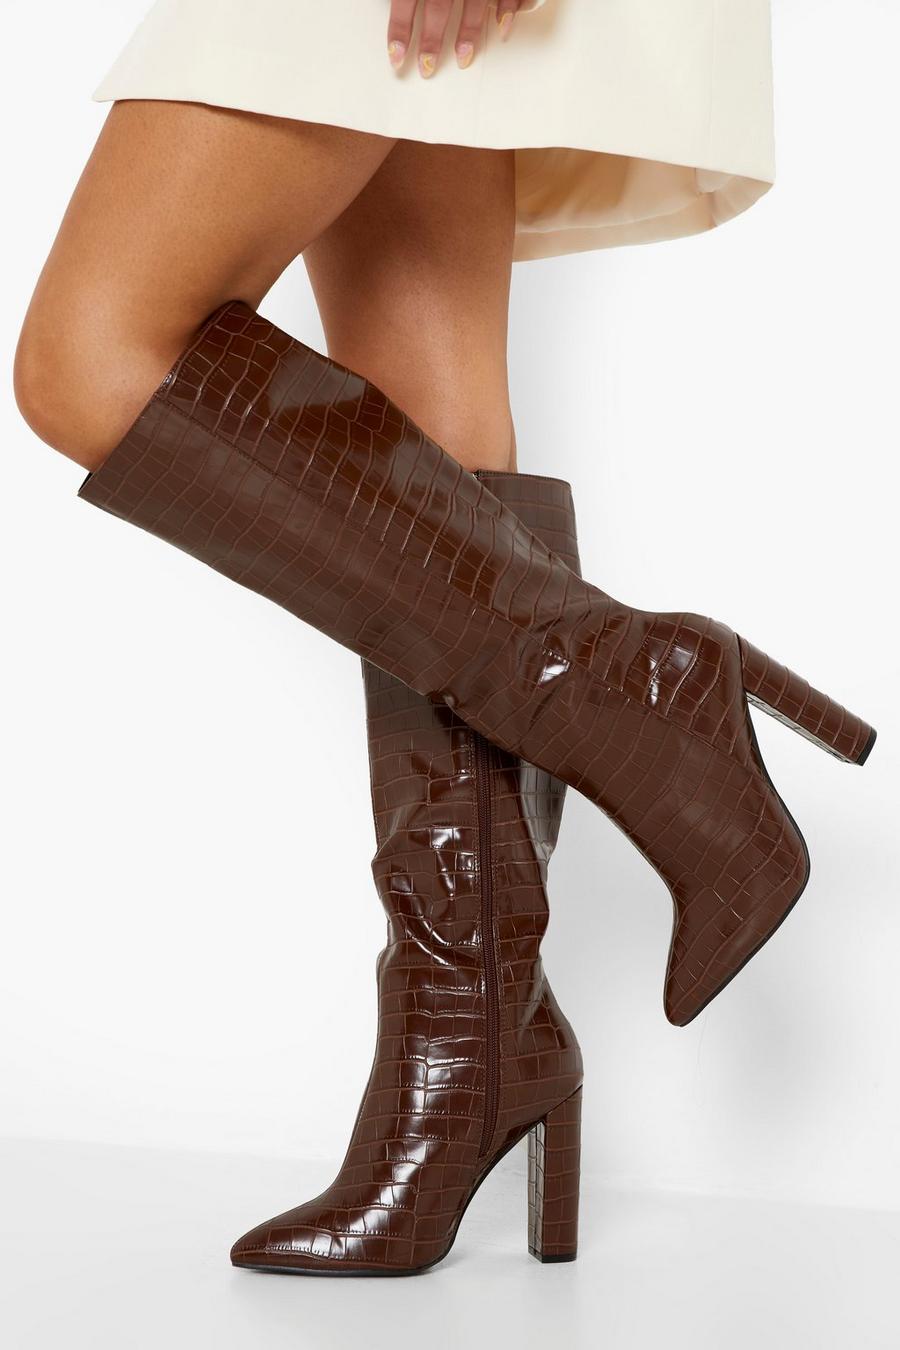 Bottes pointues croco - Pointure large, Chocolate marron